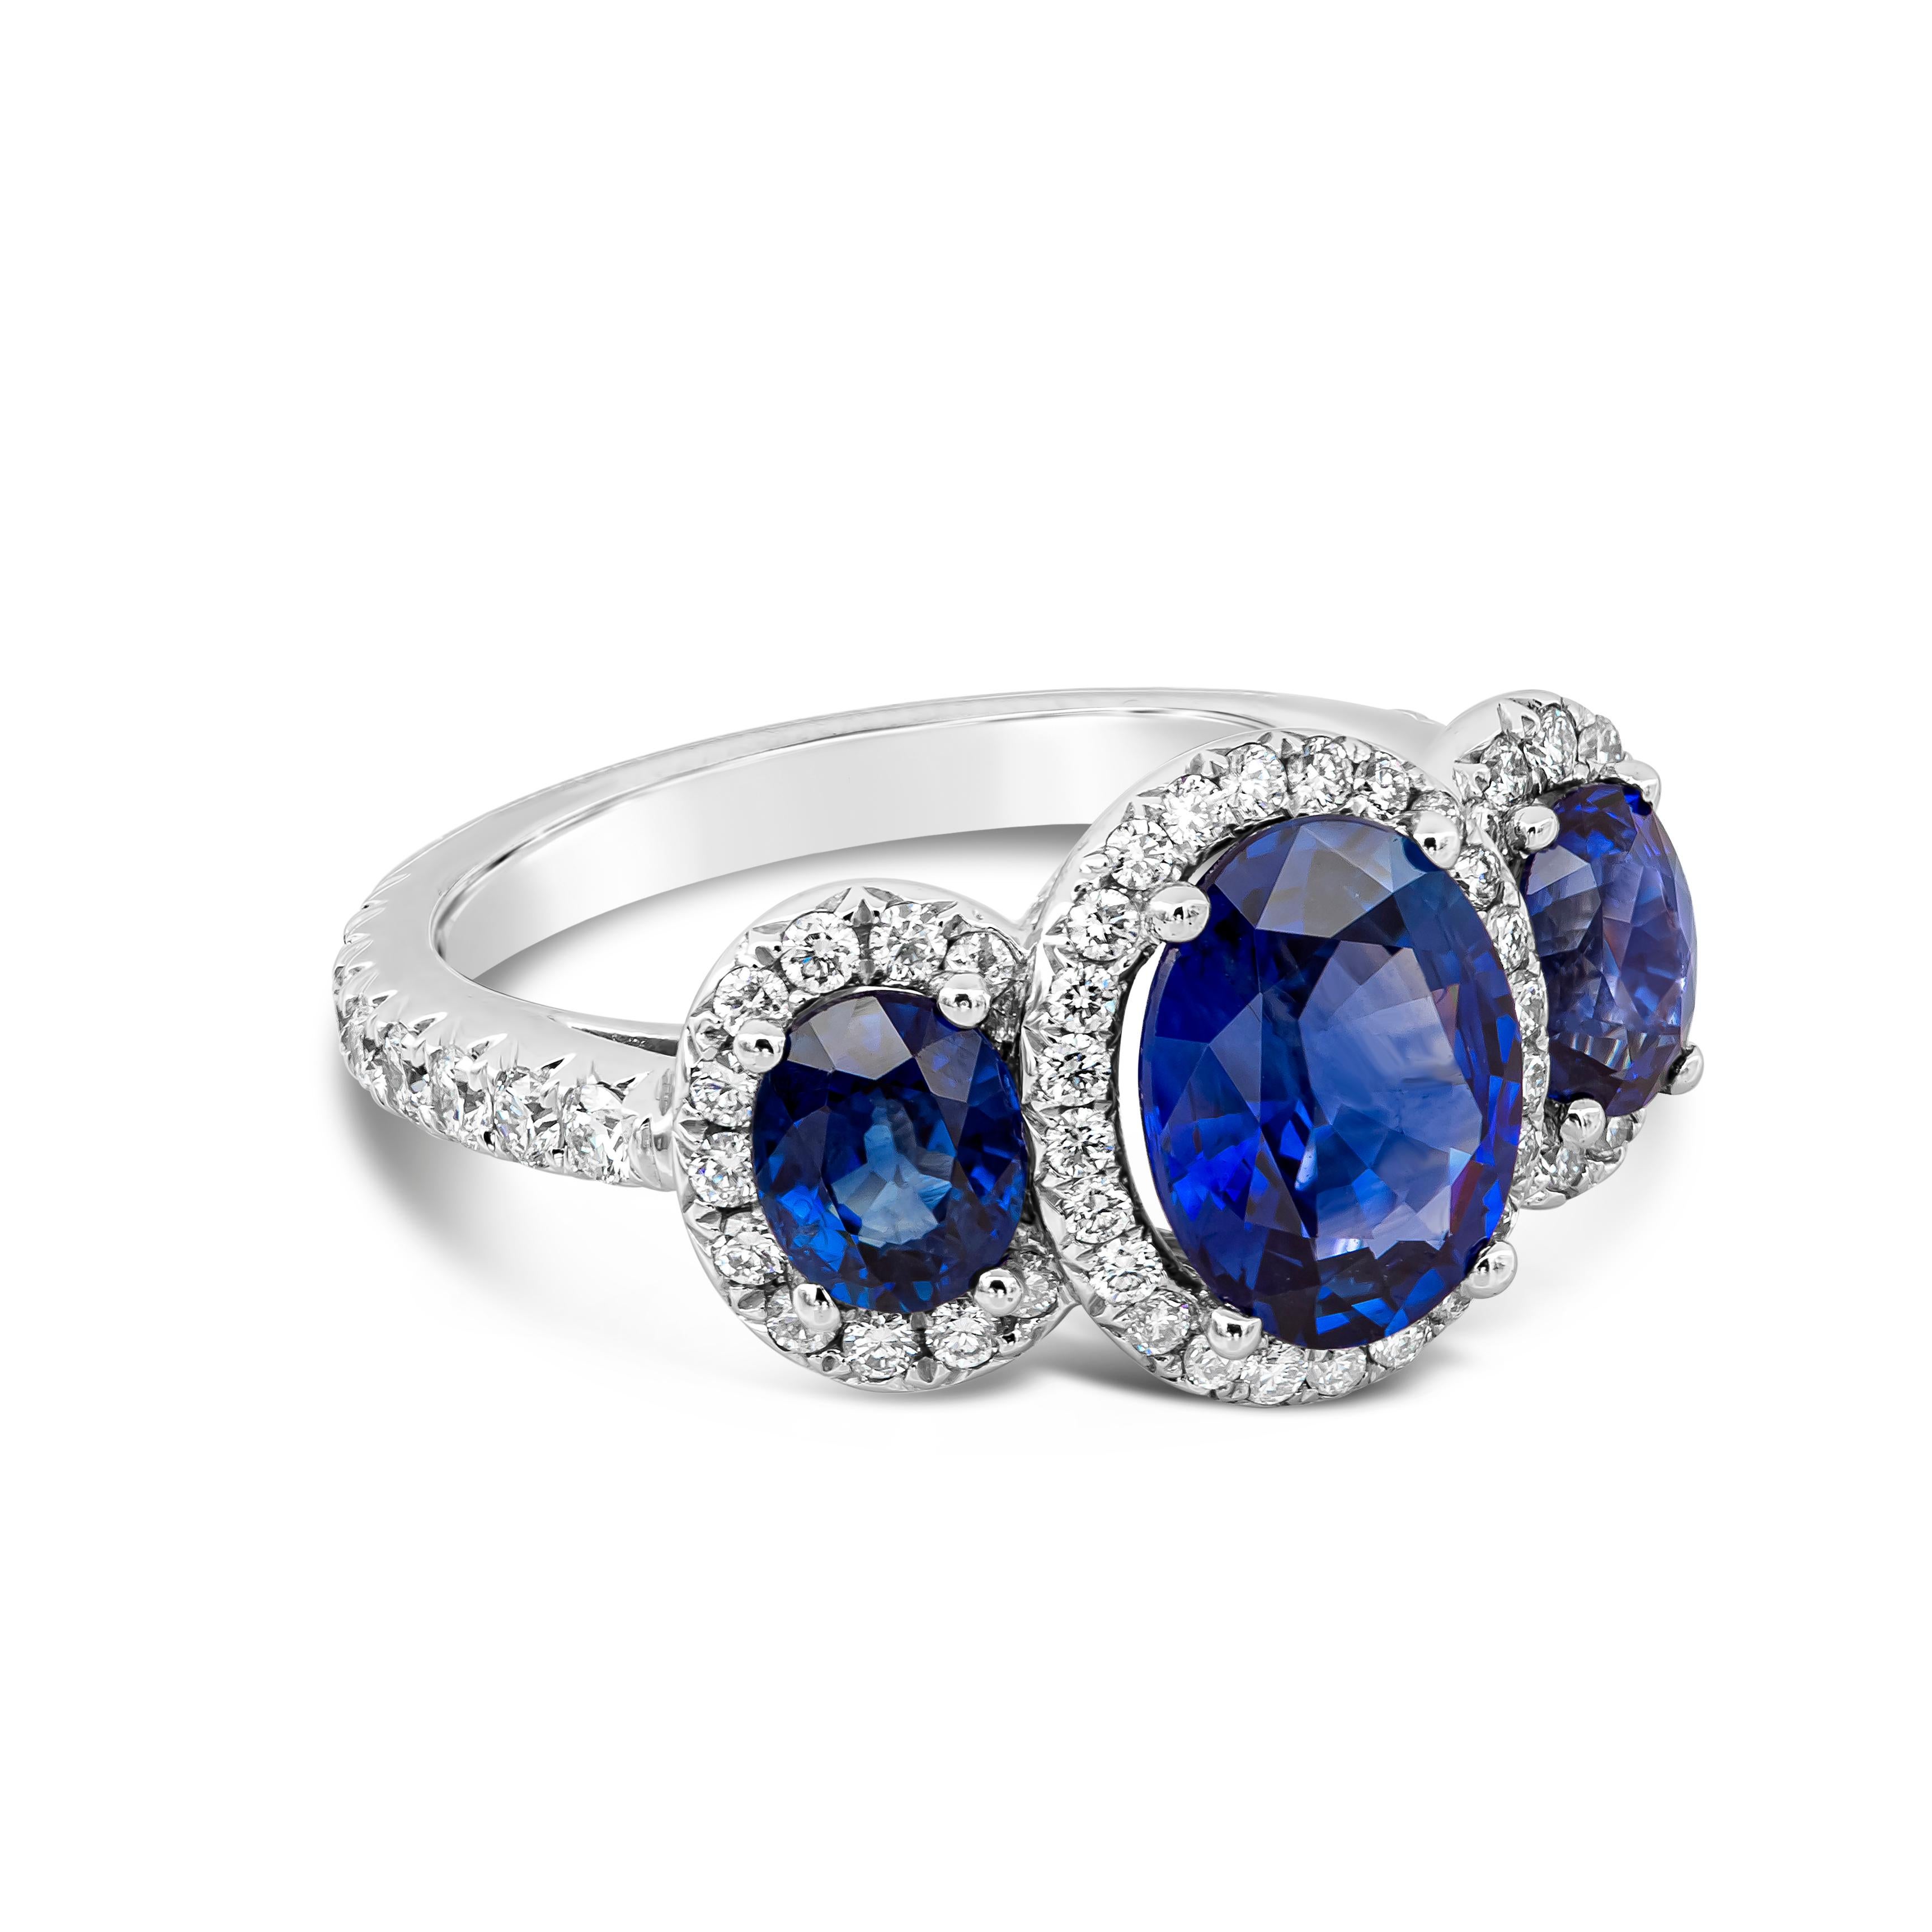 A vibrant and unique three-stone engagement ring style showcasing a 2.11 carat blue sapphire, flanked by smaller blue sapphires weighing 1.40 carats total on either side. Each stone is set in a brilliant diamond halo, set in a diamond encrusted